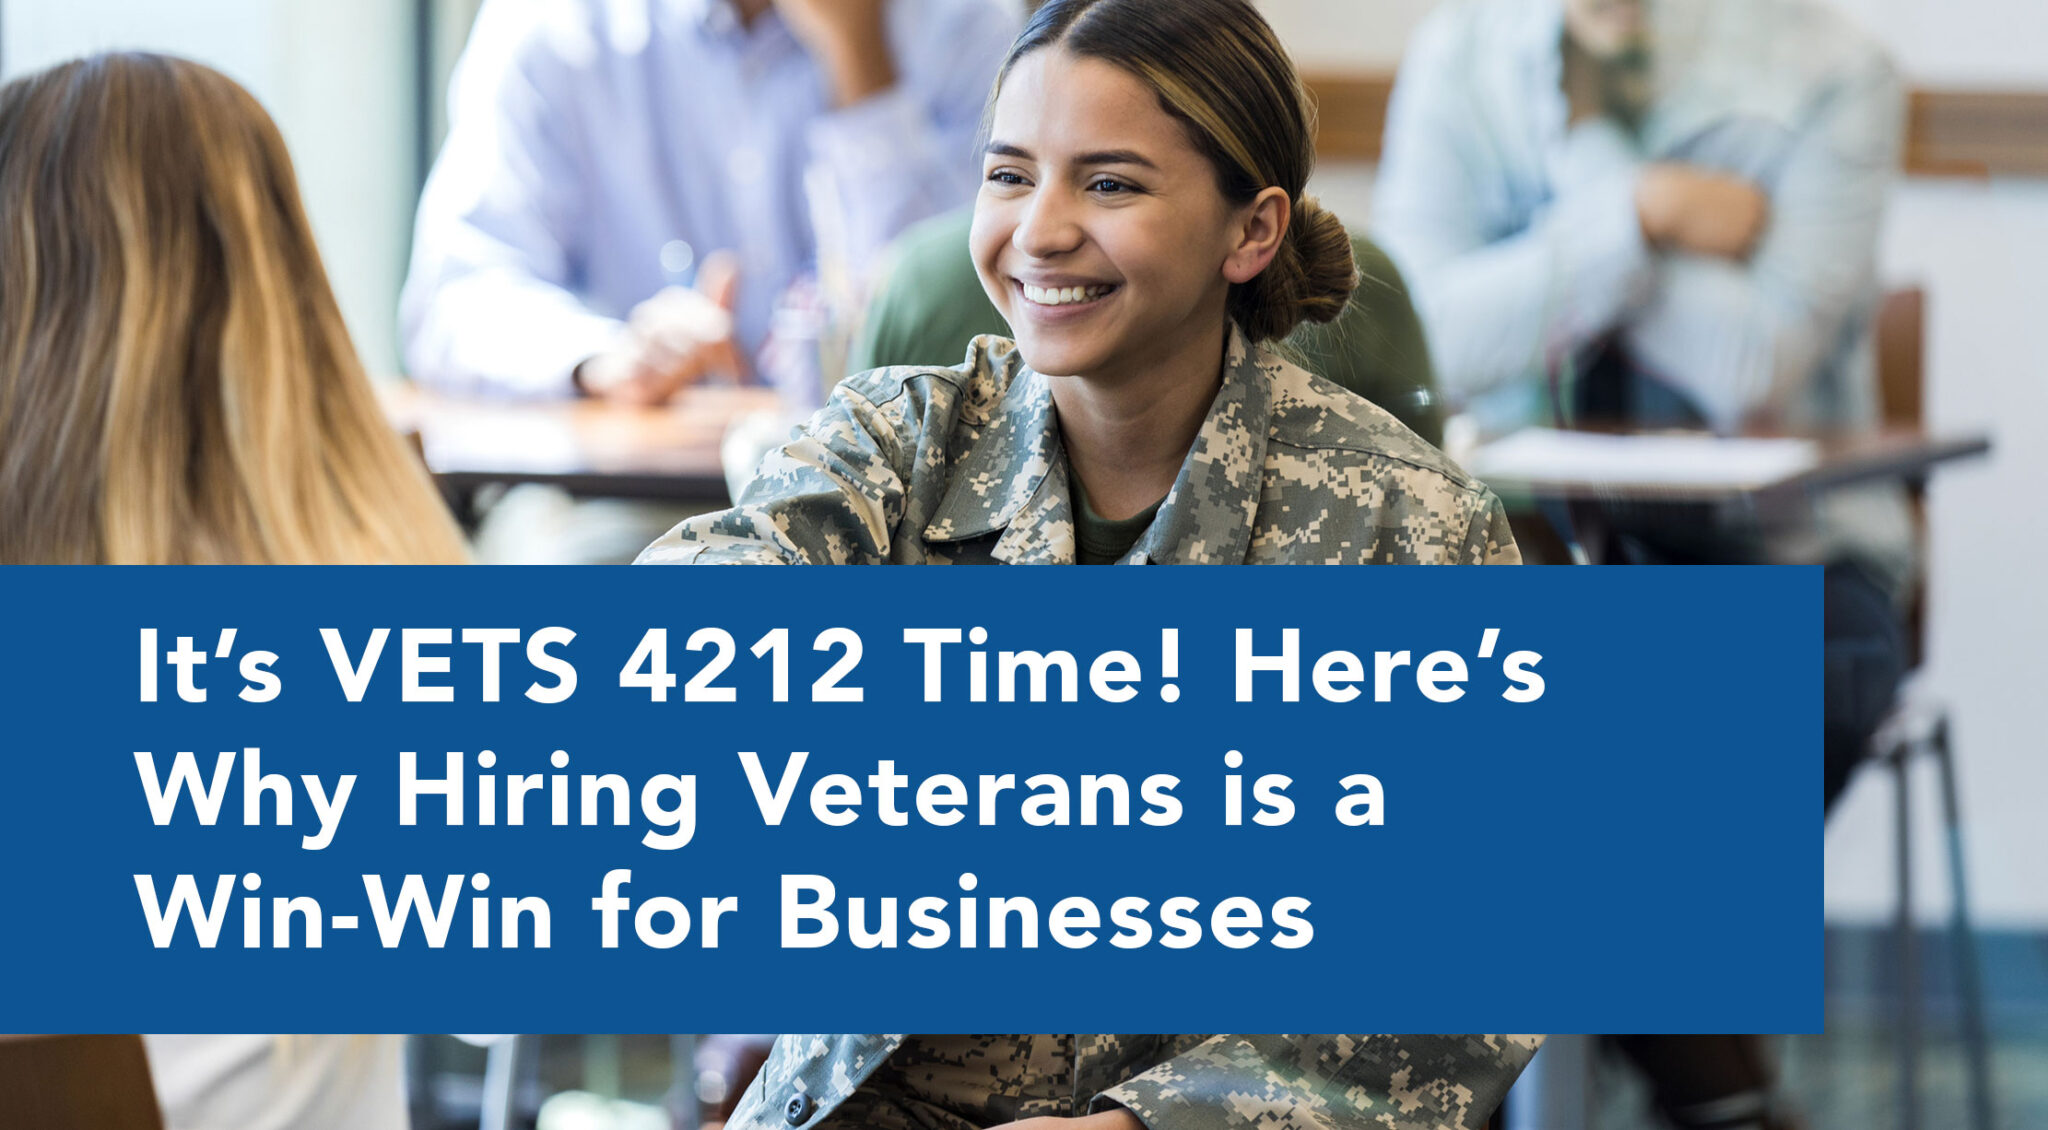 VETS 4212 Why Hiring Veterans is a WinWin for Businesses